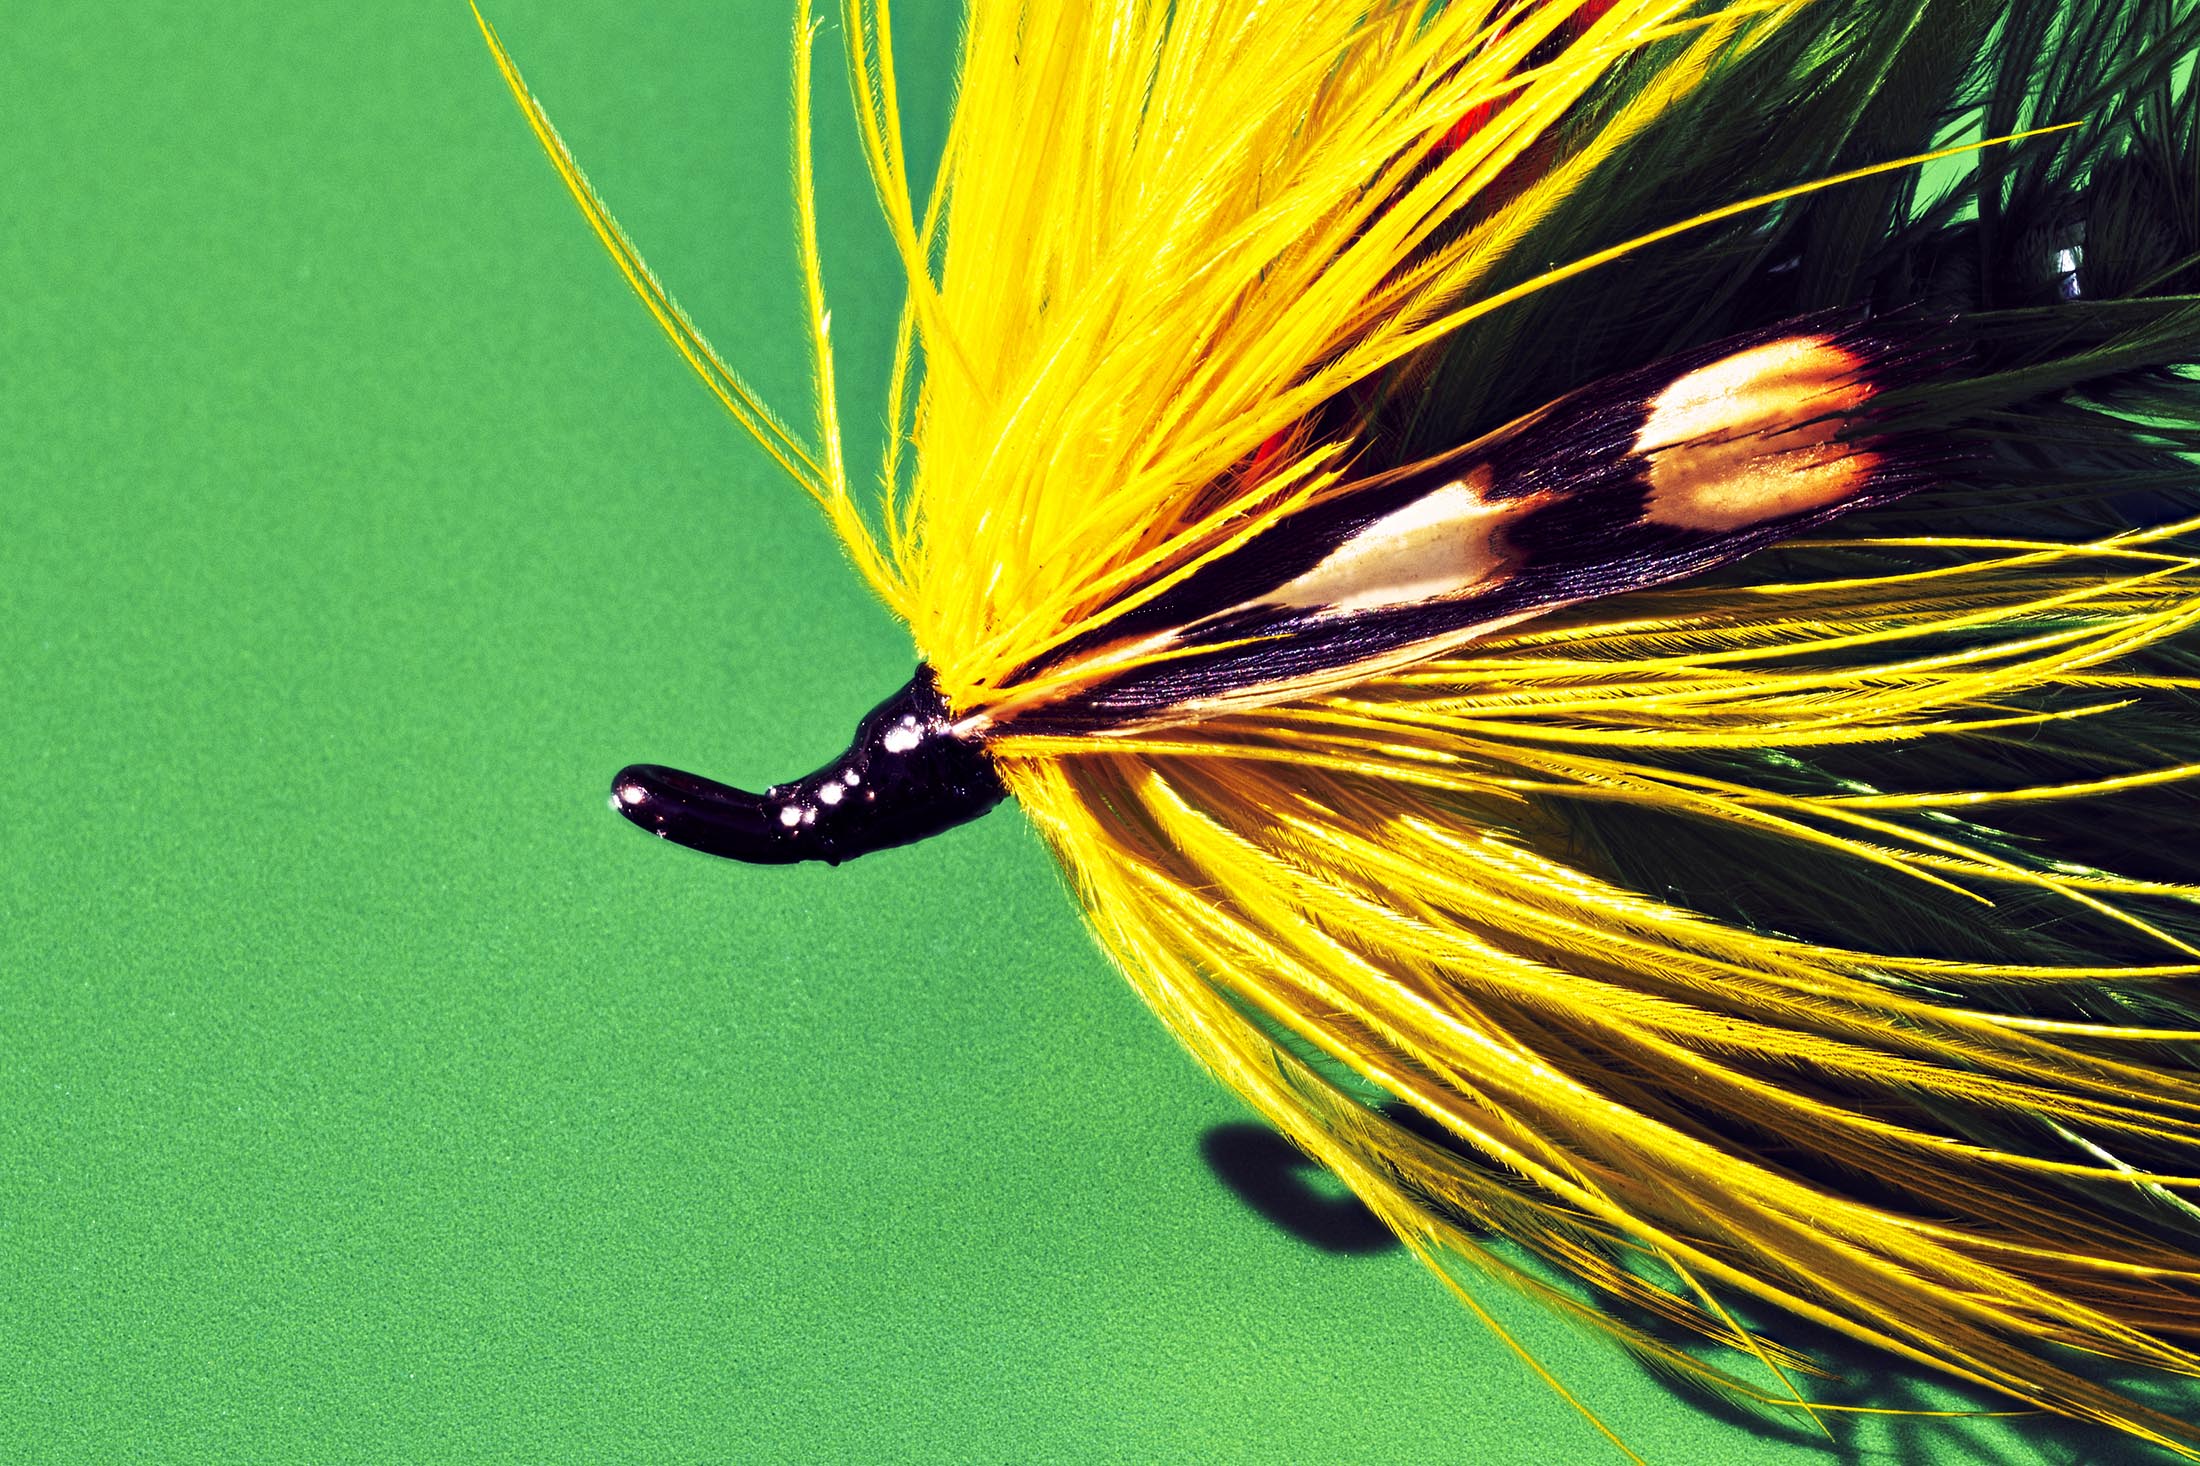 Tying Fishing Flies With Henry Hoffman, Grizzly Hackle Feathers - Bloomberg